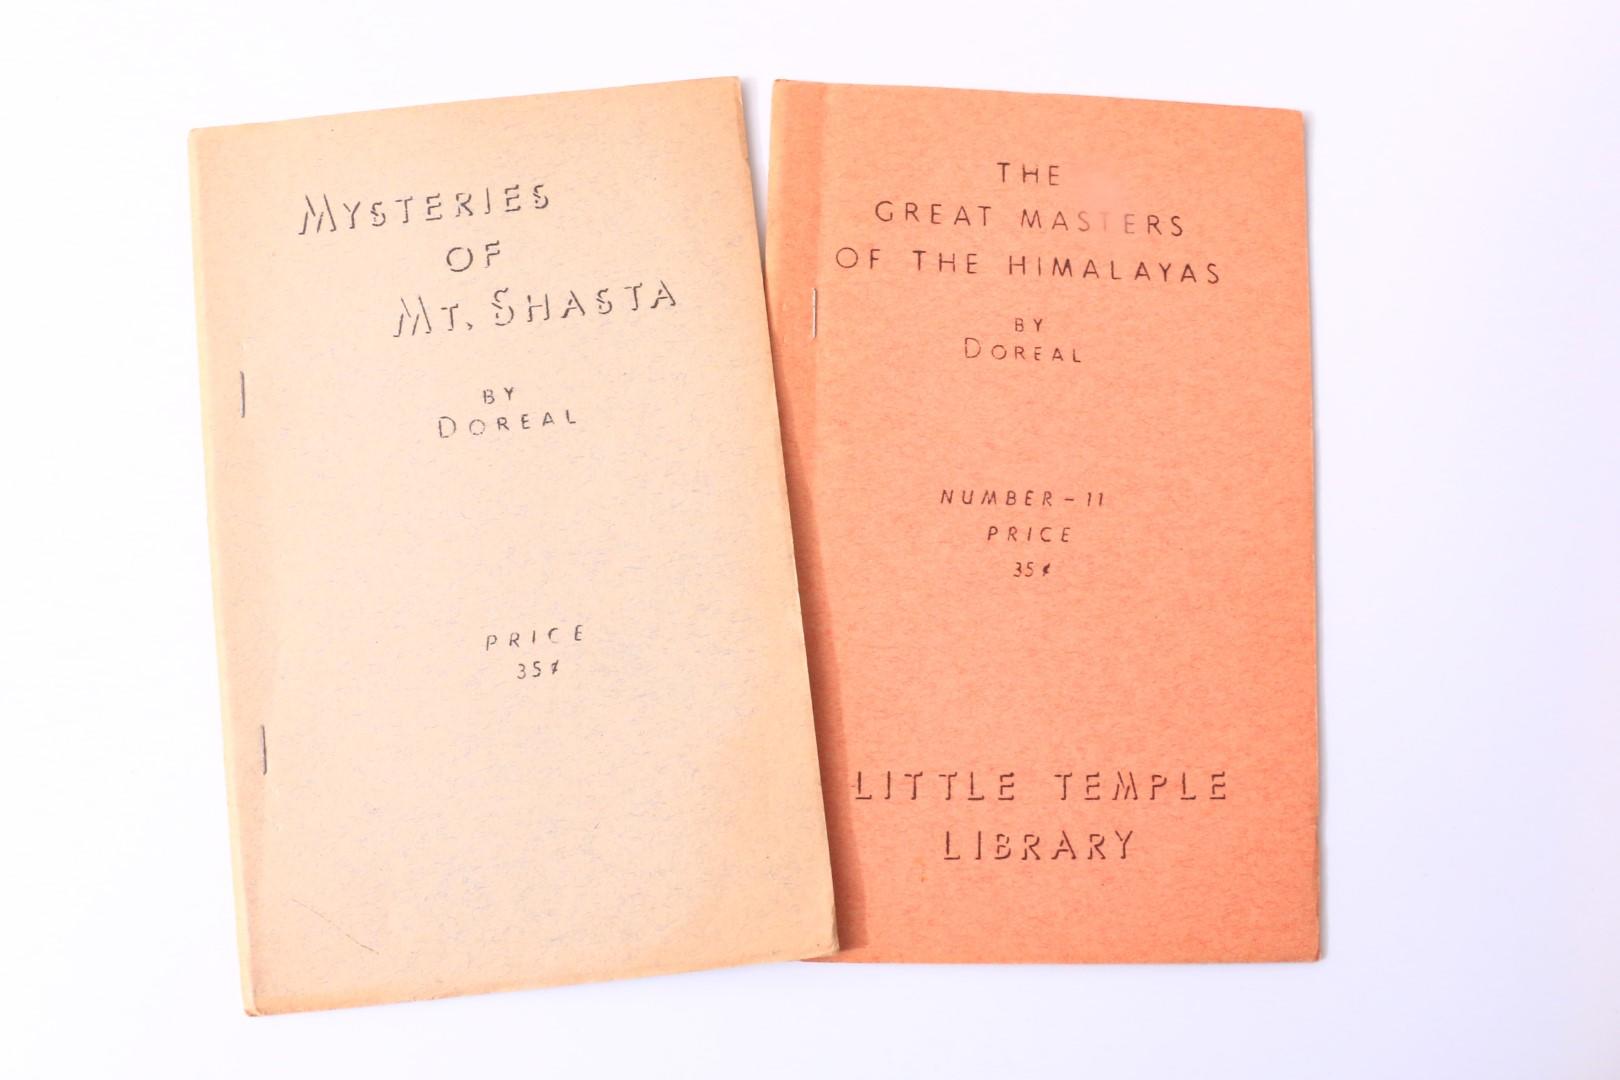 [Maurice] Doreal - Mysteries of Mt. Shasta w/ The Great Masters of the Himalayas - Brotherhood of the White Temple, n.d. [c1950s?], First Edition.